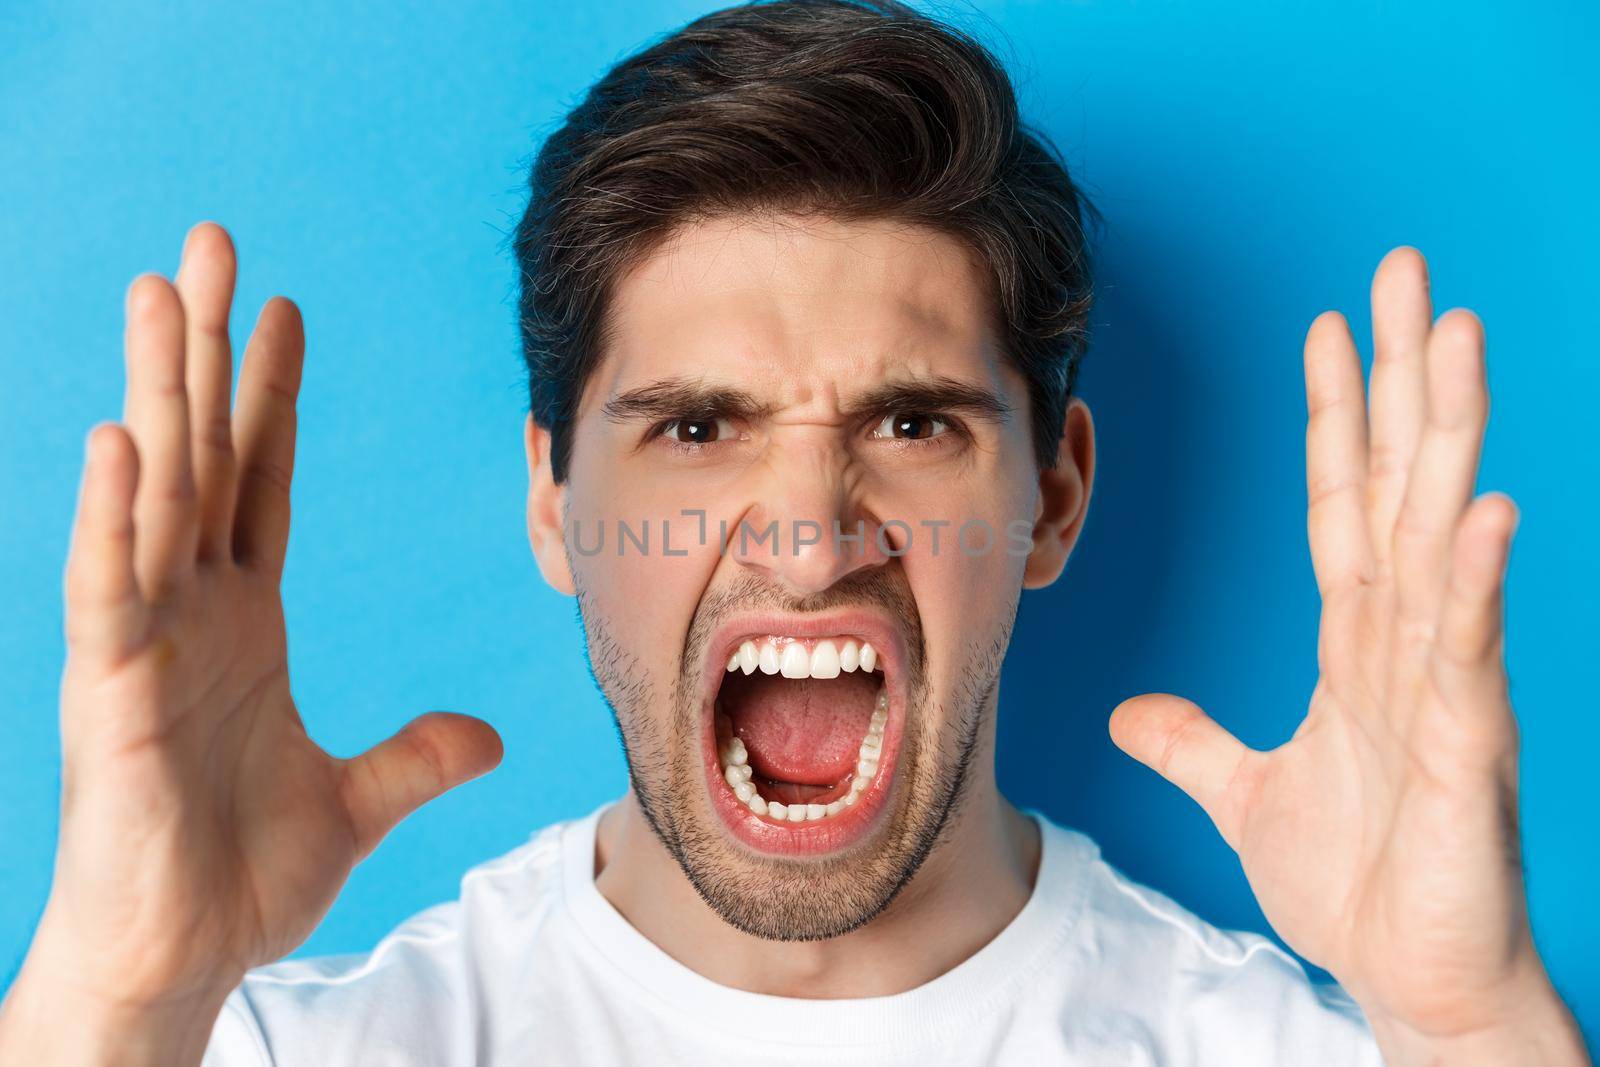 Headshot of man showing anger and frustration, yelling with outraged face, standing over blue background.